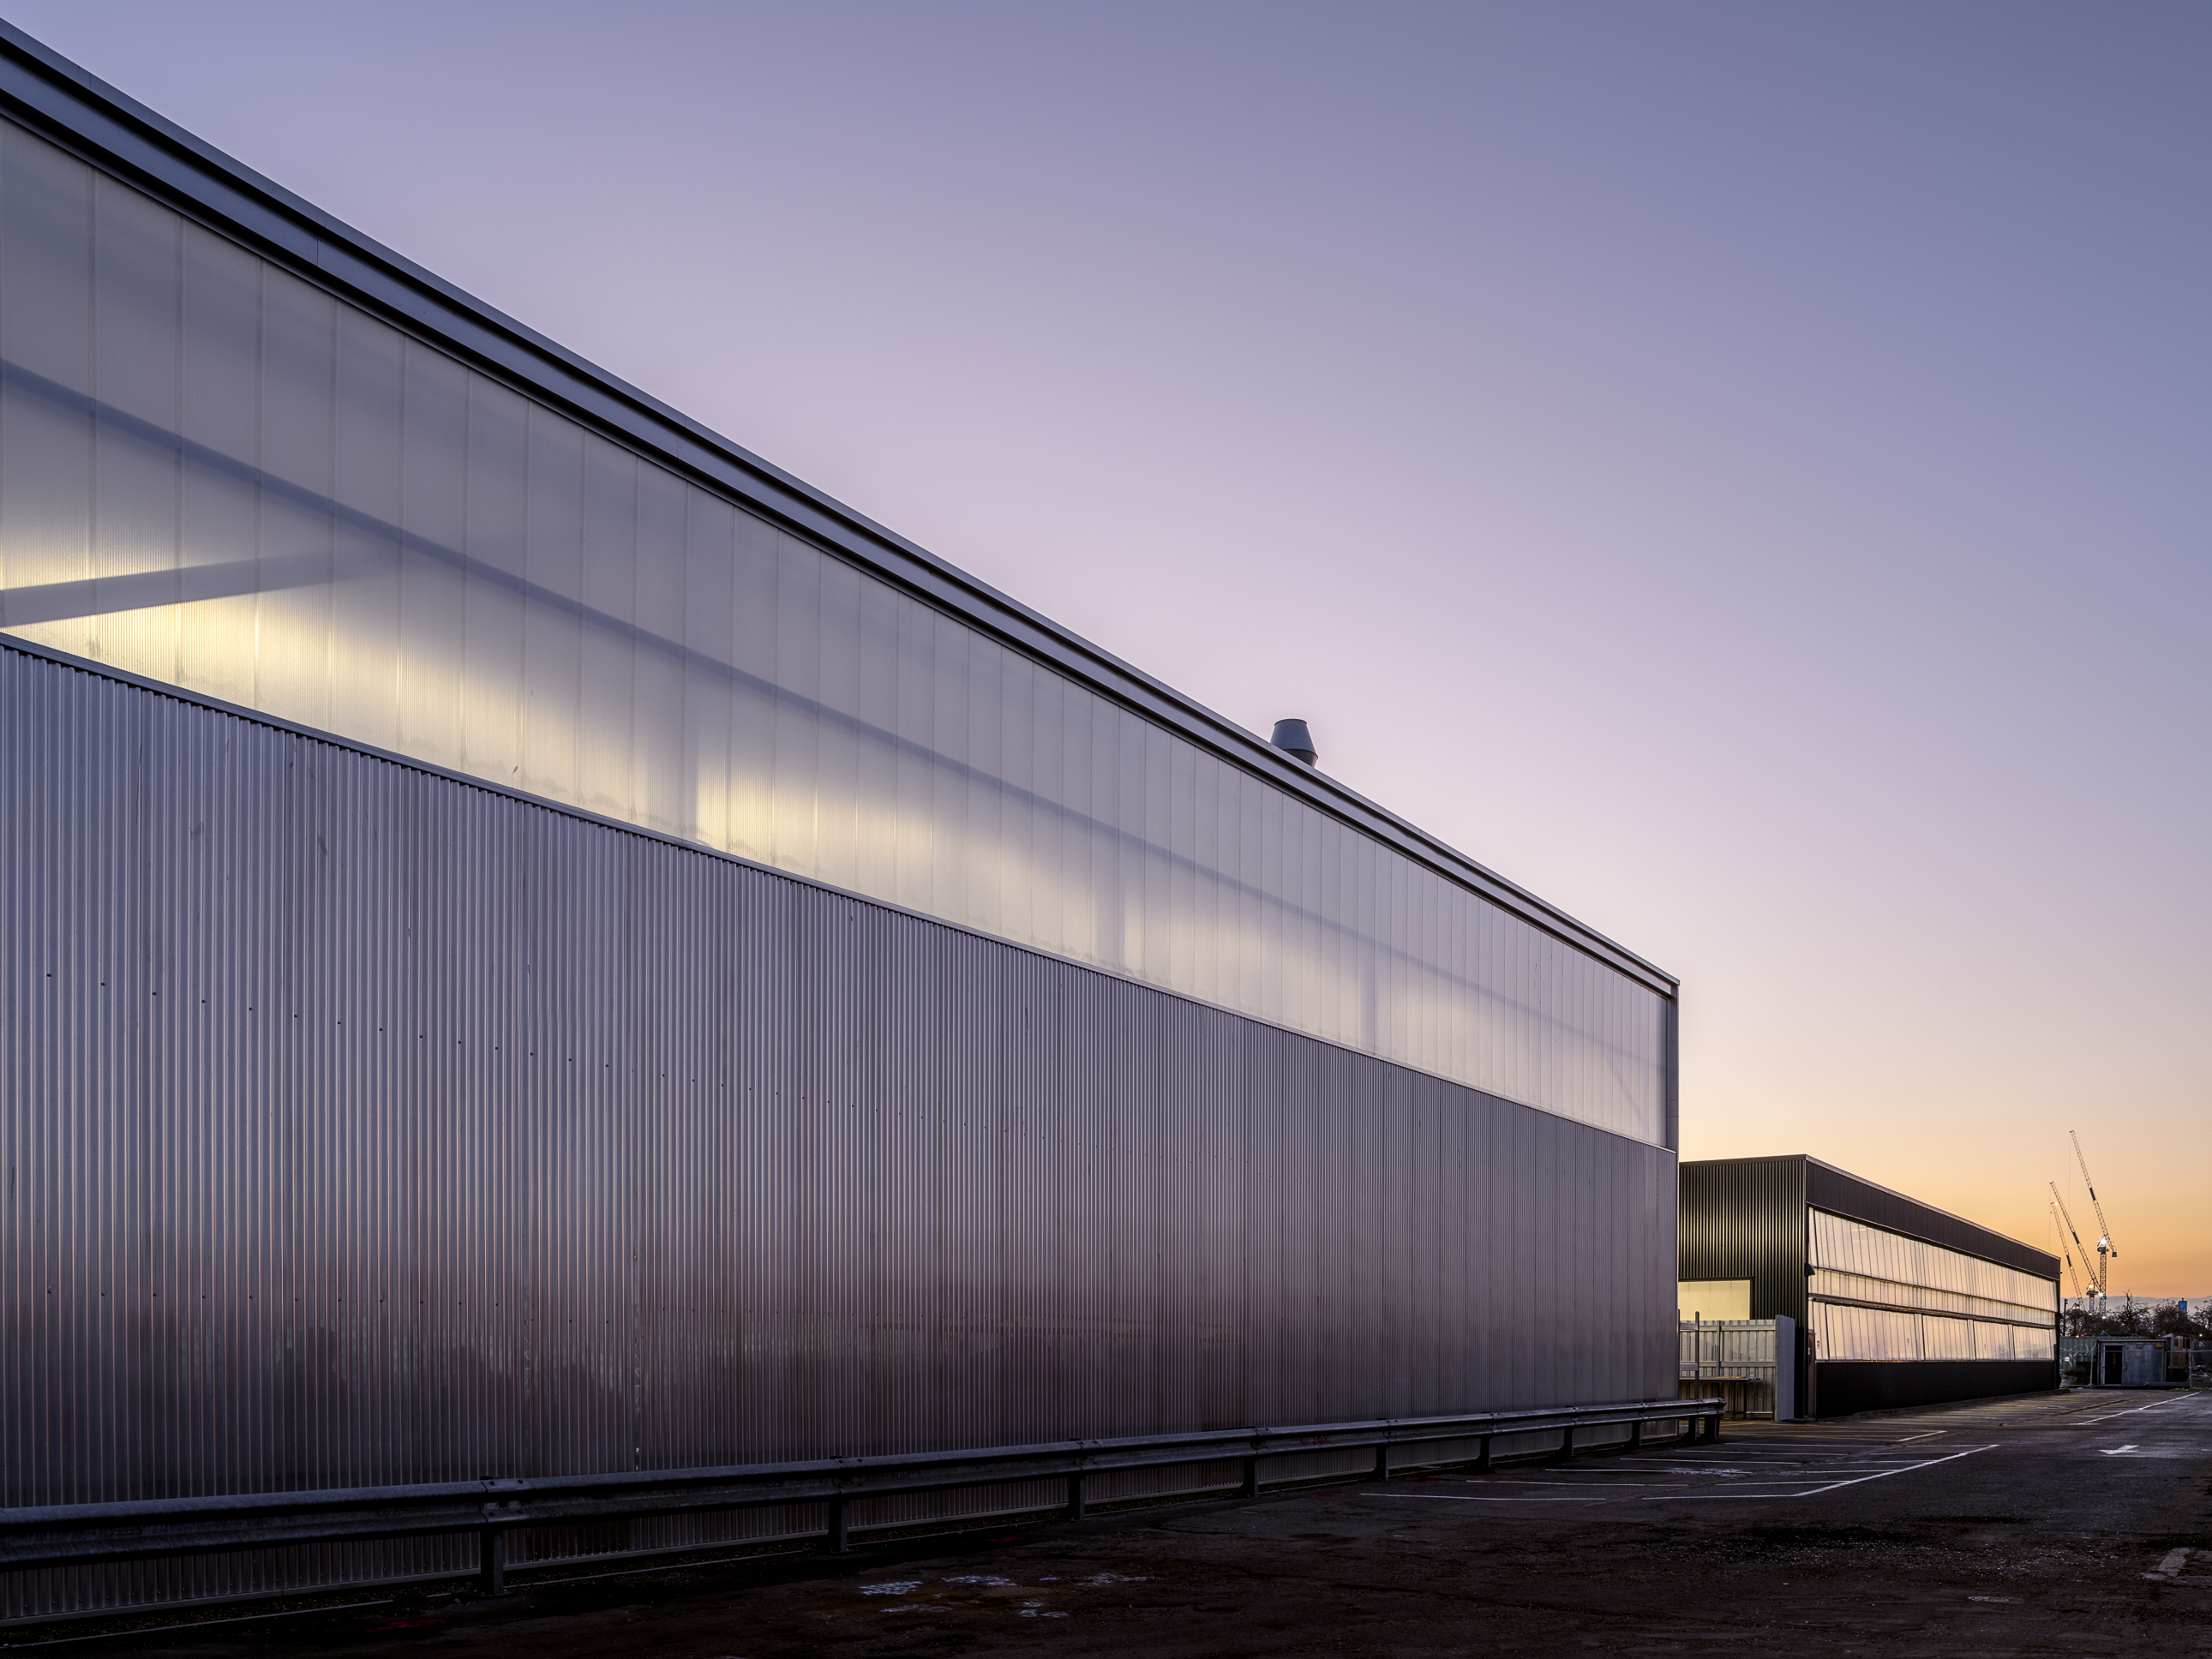 Building Bloqs' factory designed by 5th Studio has polycarbonate facade panels. Photo: Tim Soar.